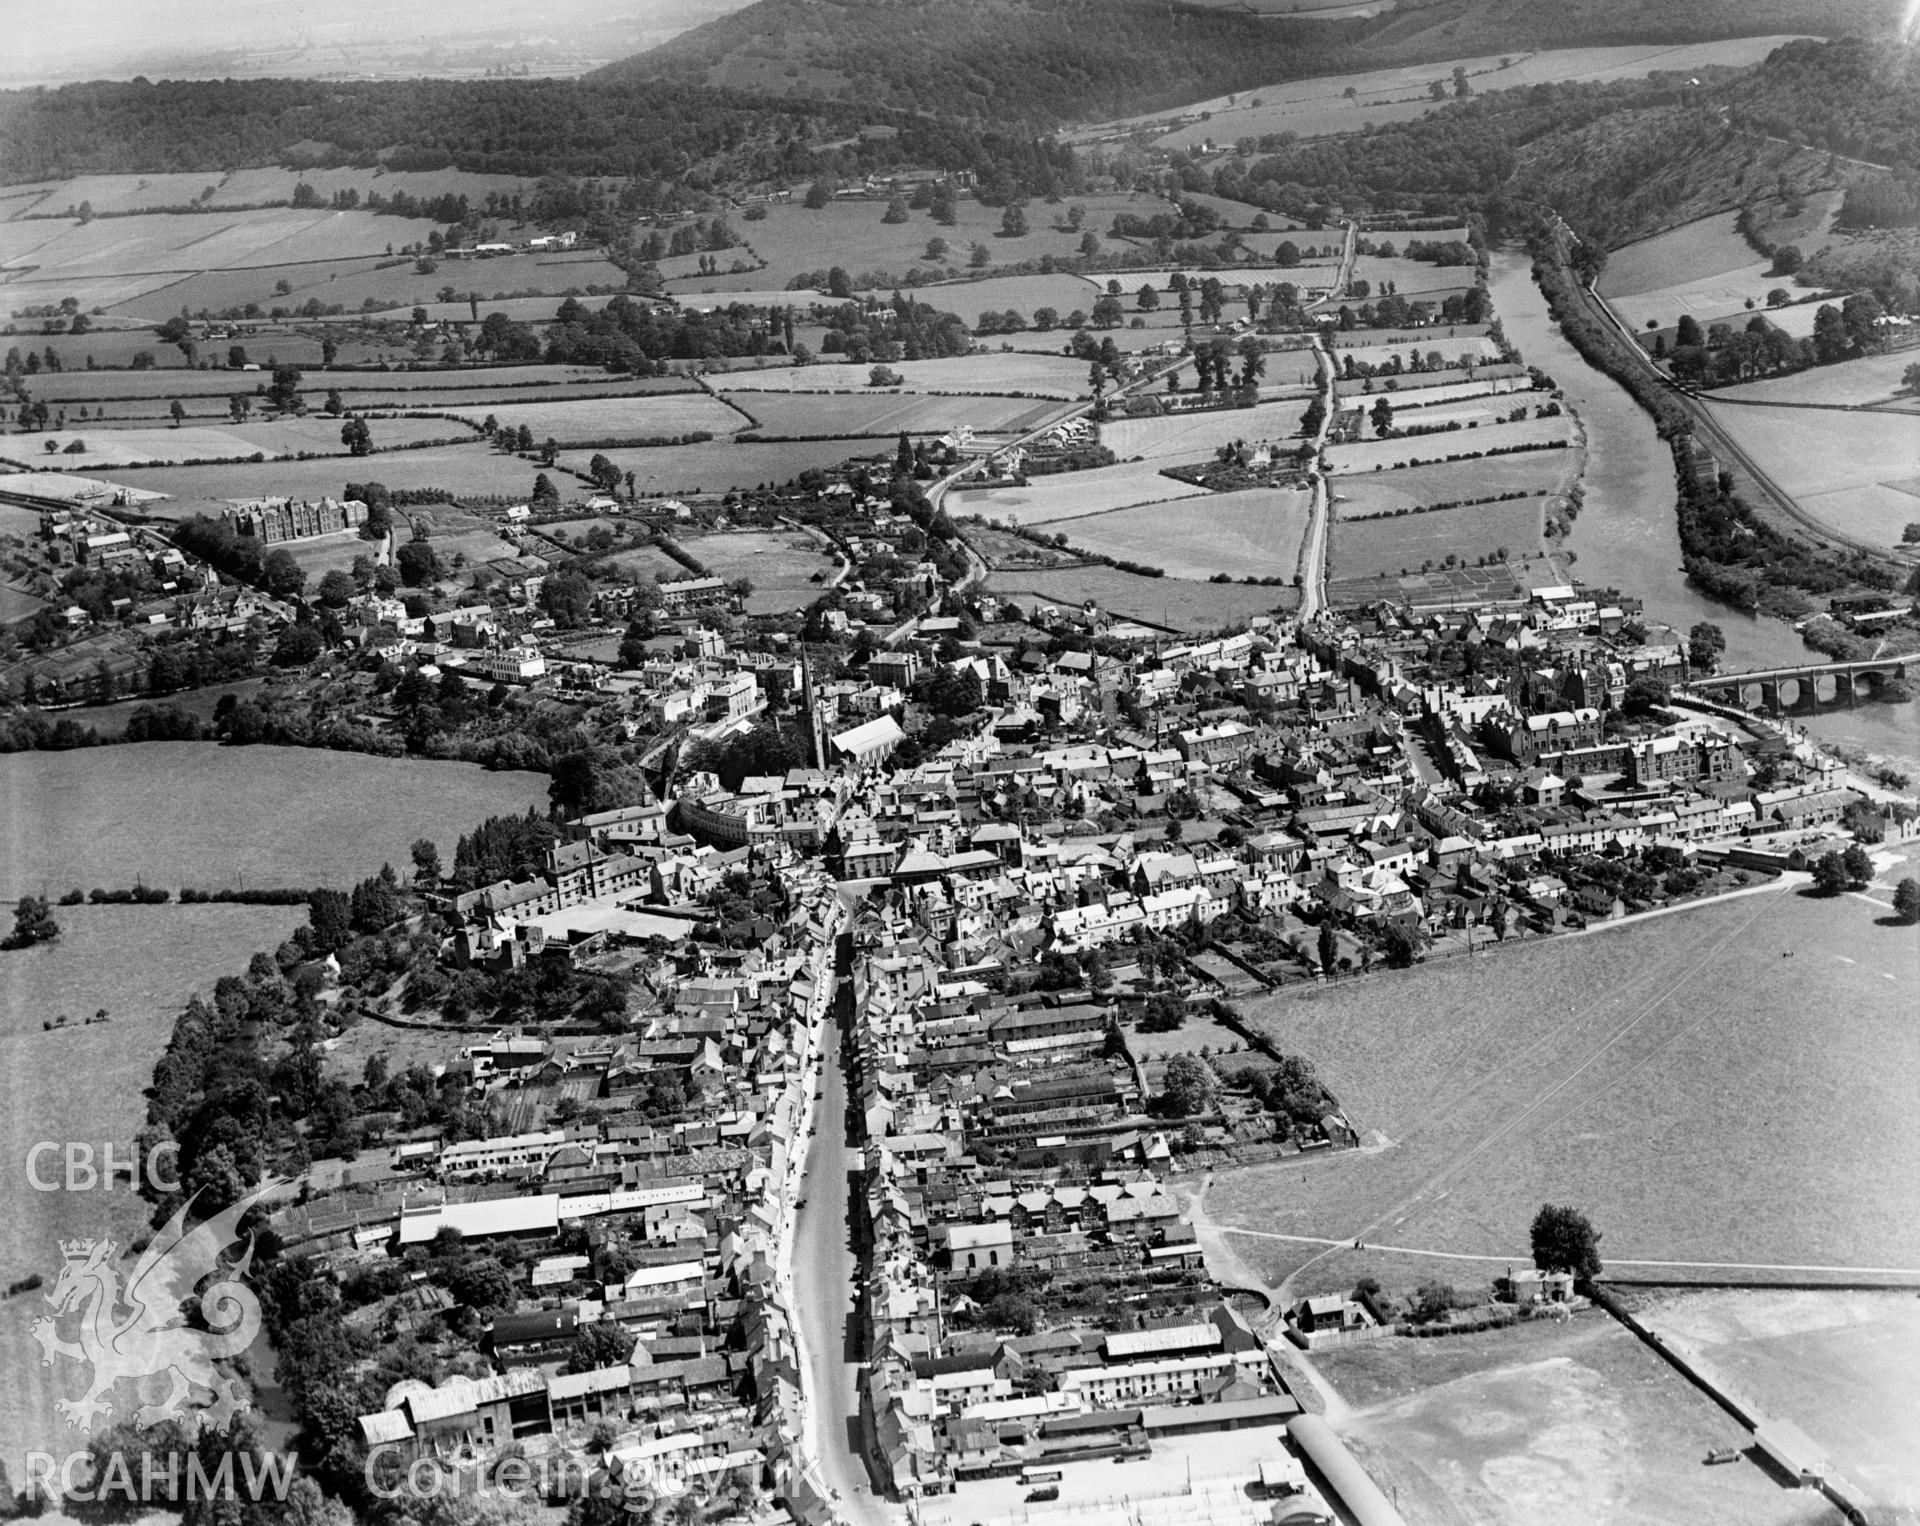 View of Monmouth, oblique aerial view. 5?x4? black and white glass plate negative.